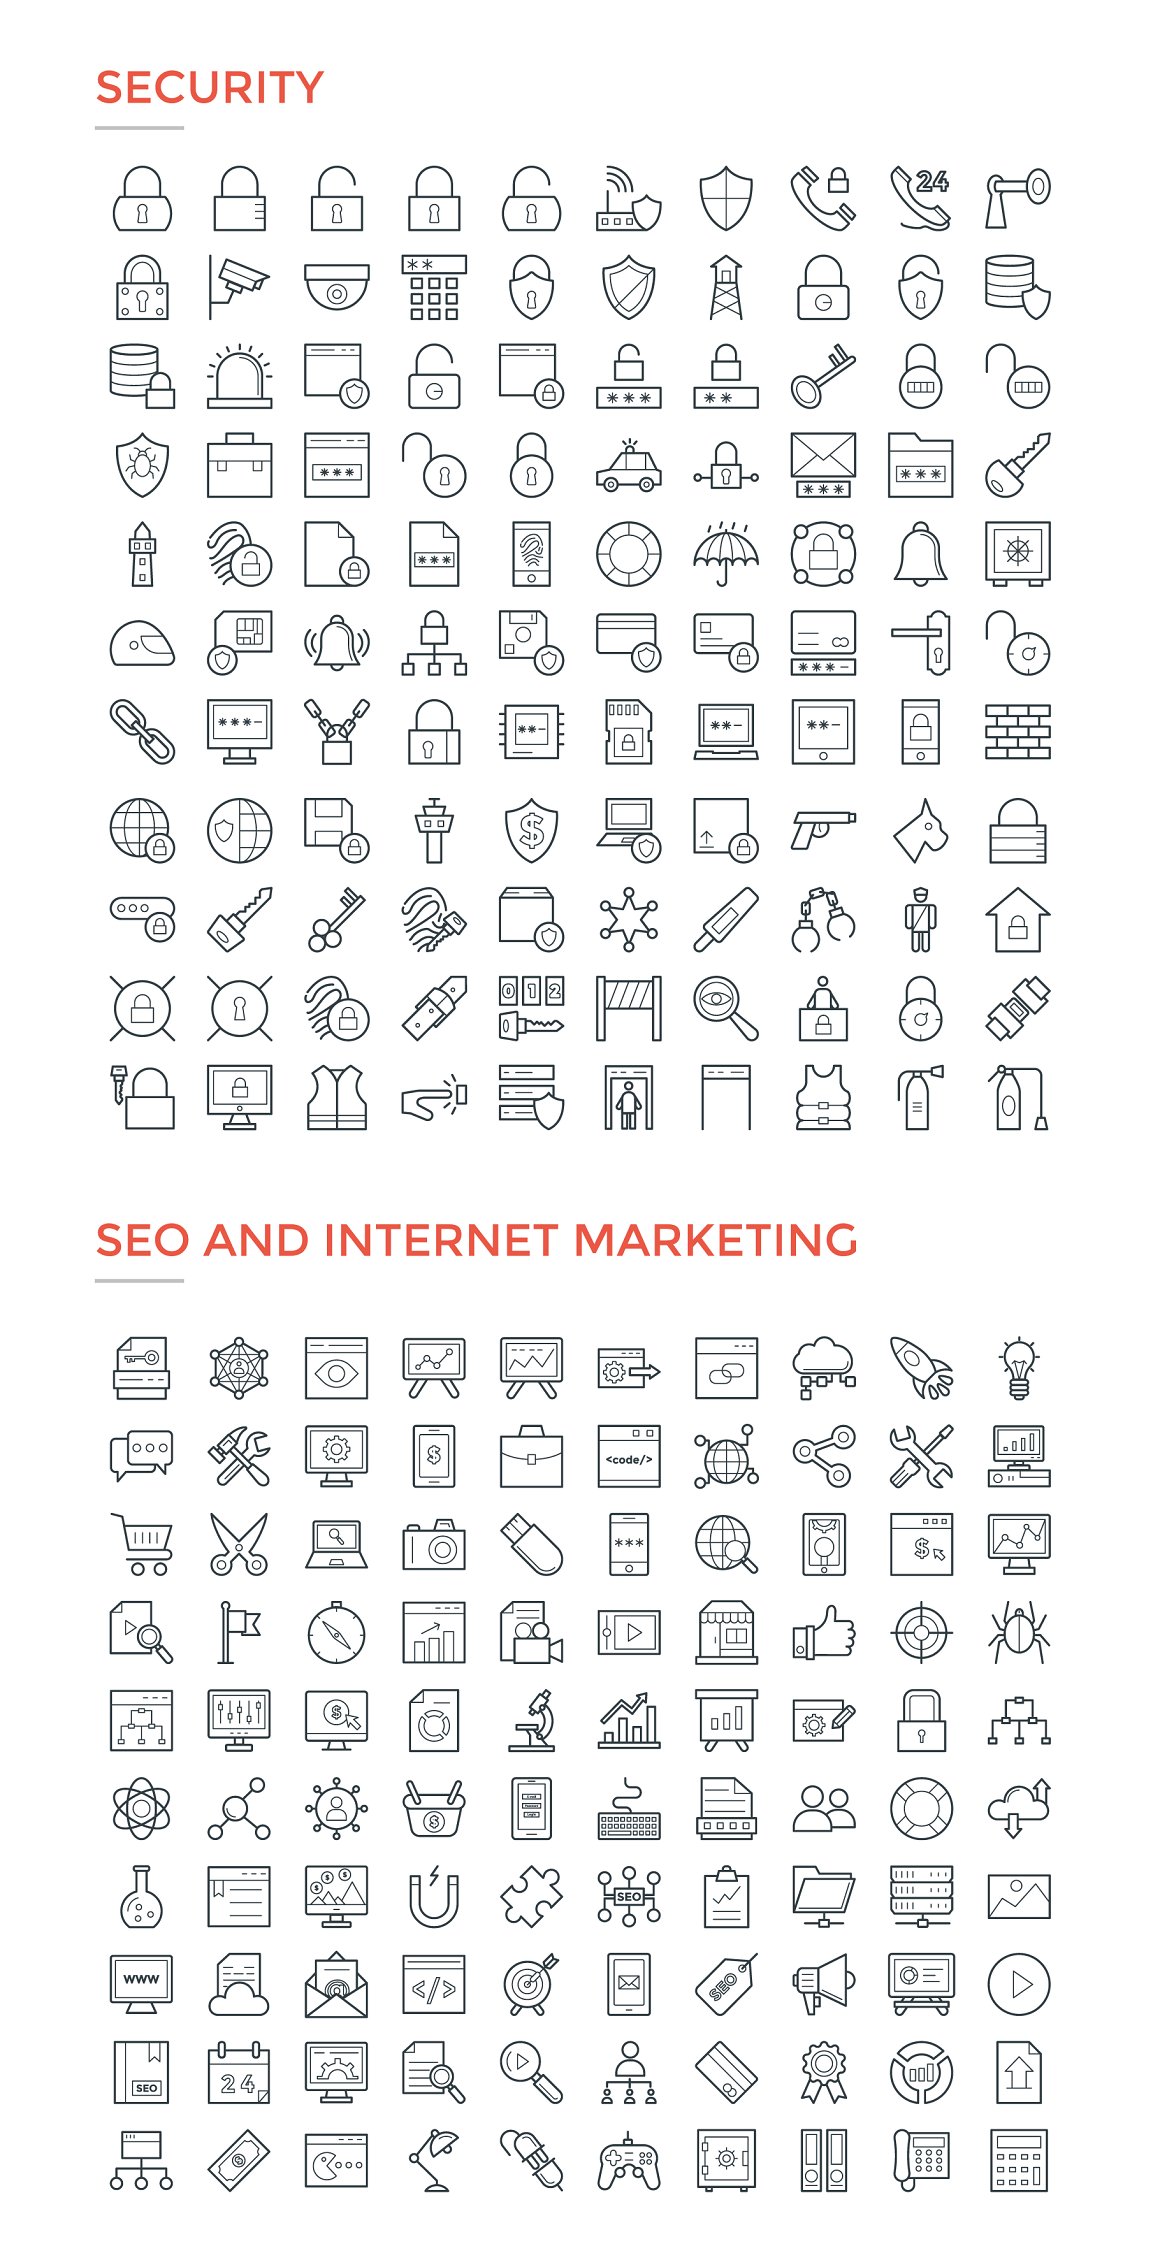 Black pack of different security and seo & internet marketing icons on a white background.